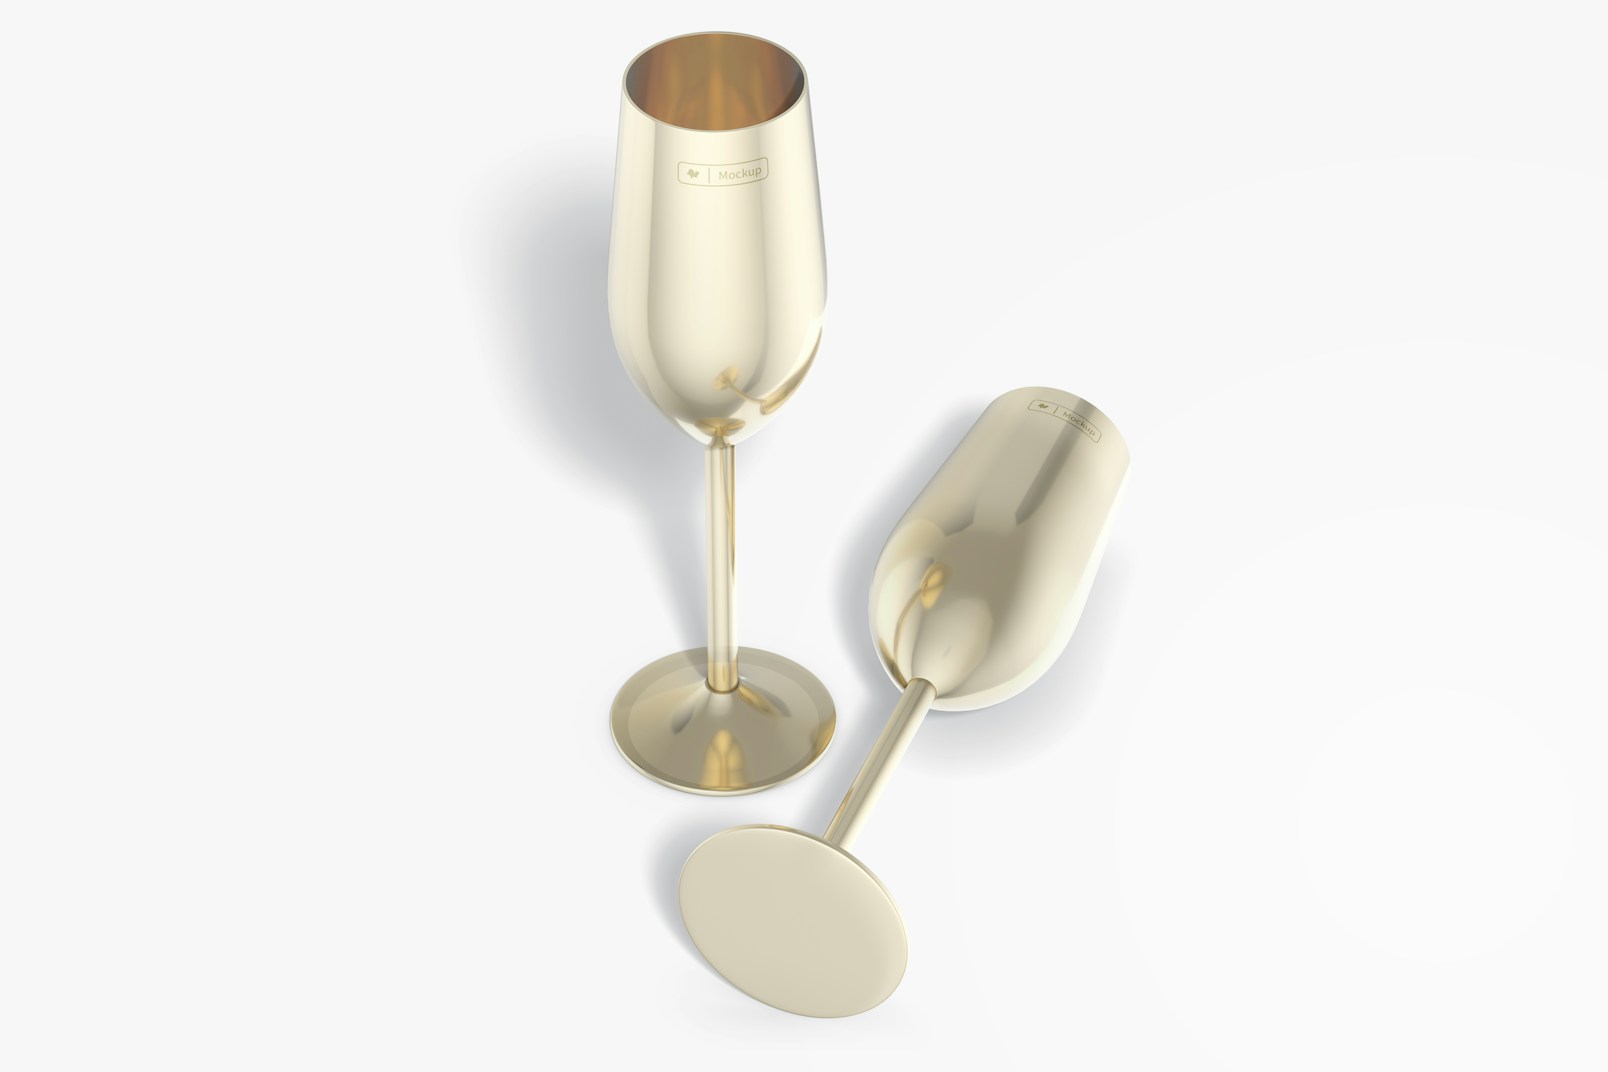 Stainless Steel Champagne Glasses Mockup, Perspective